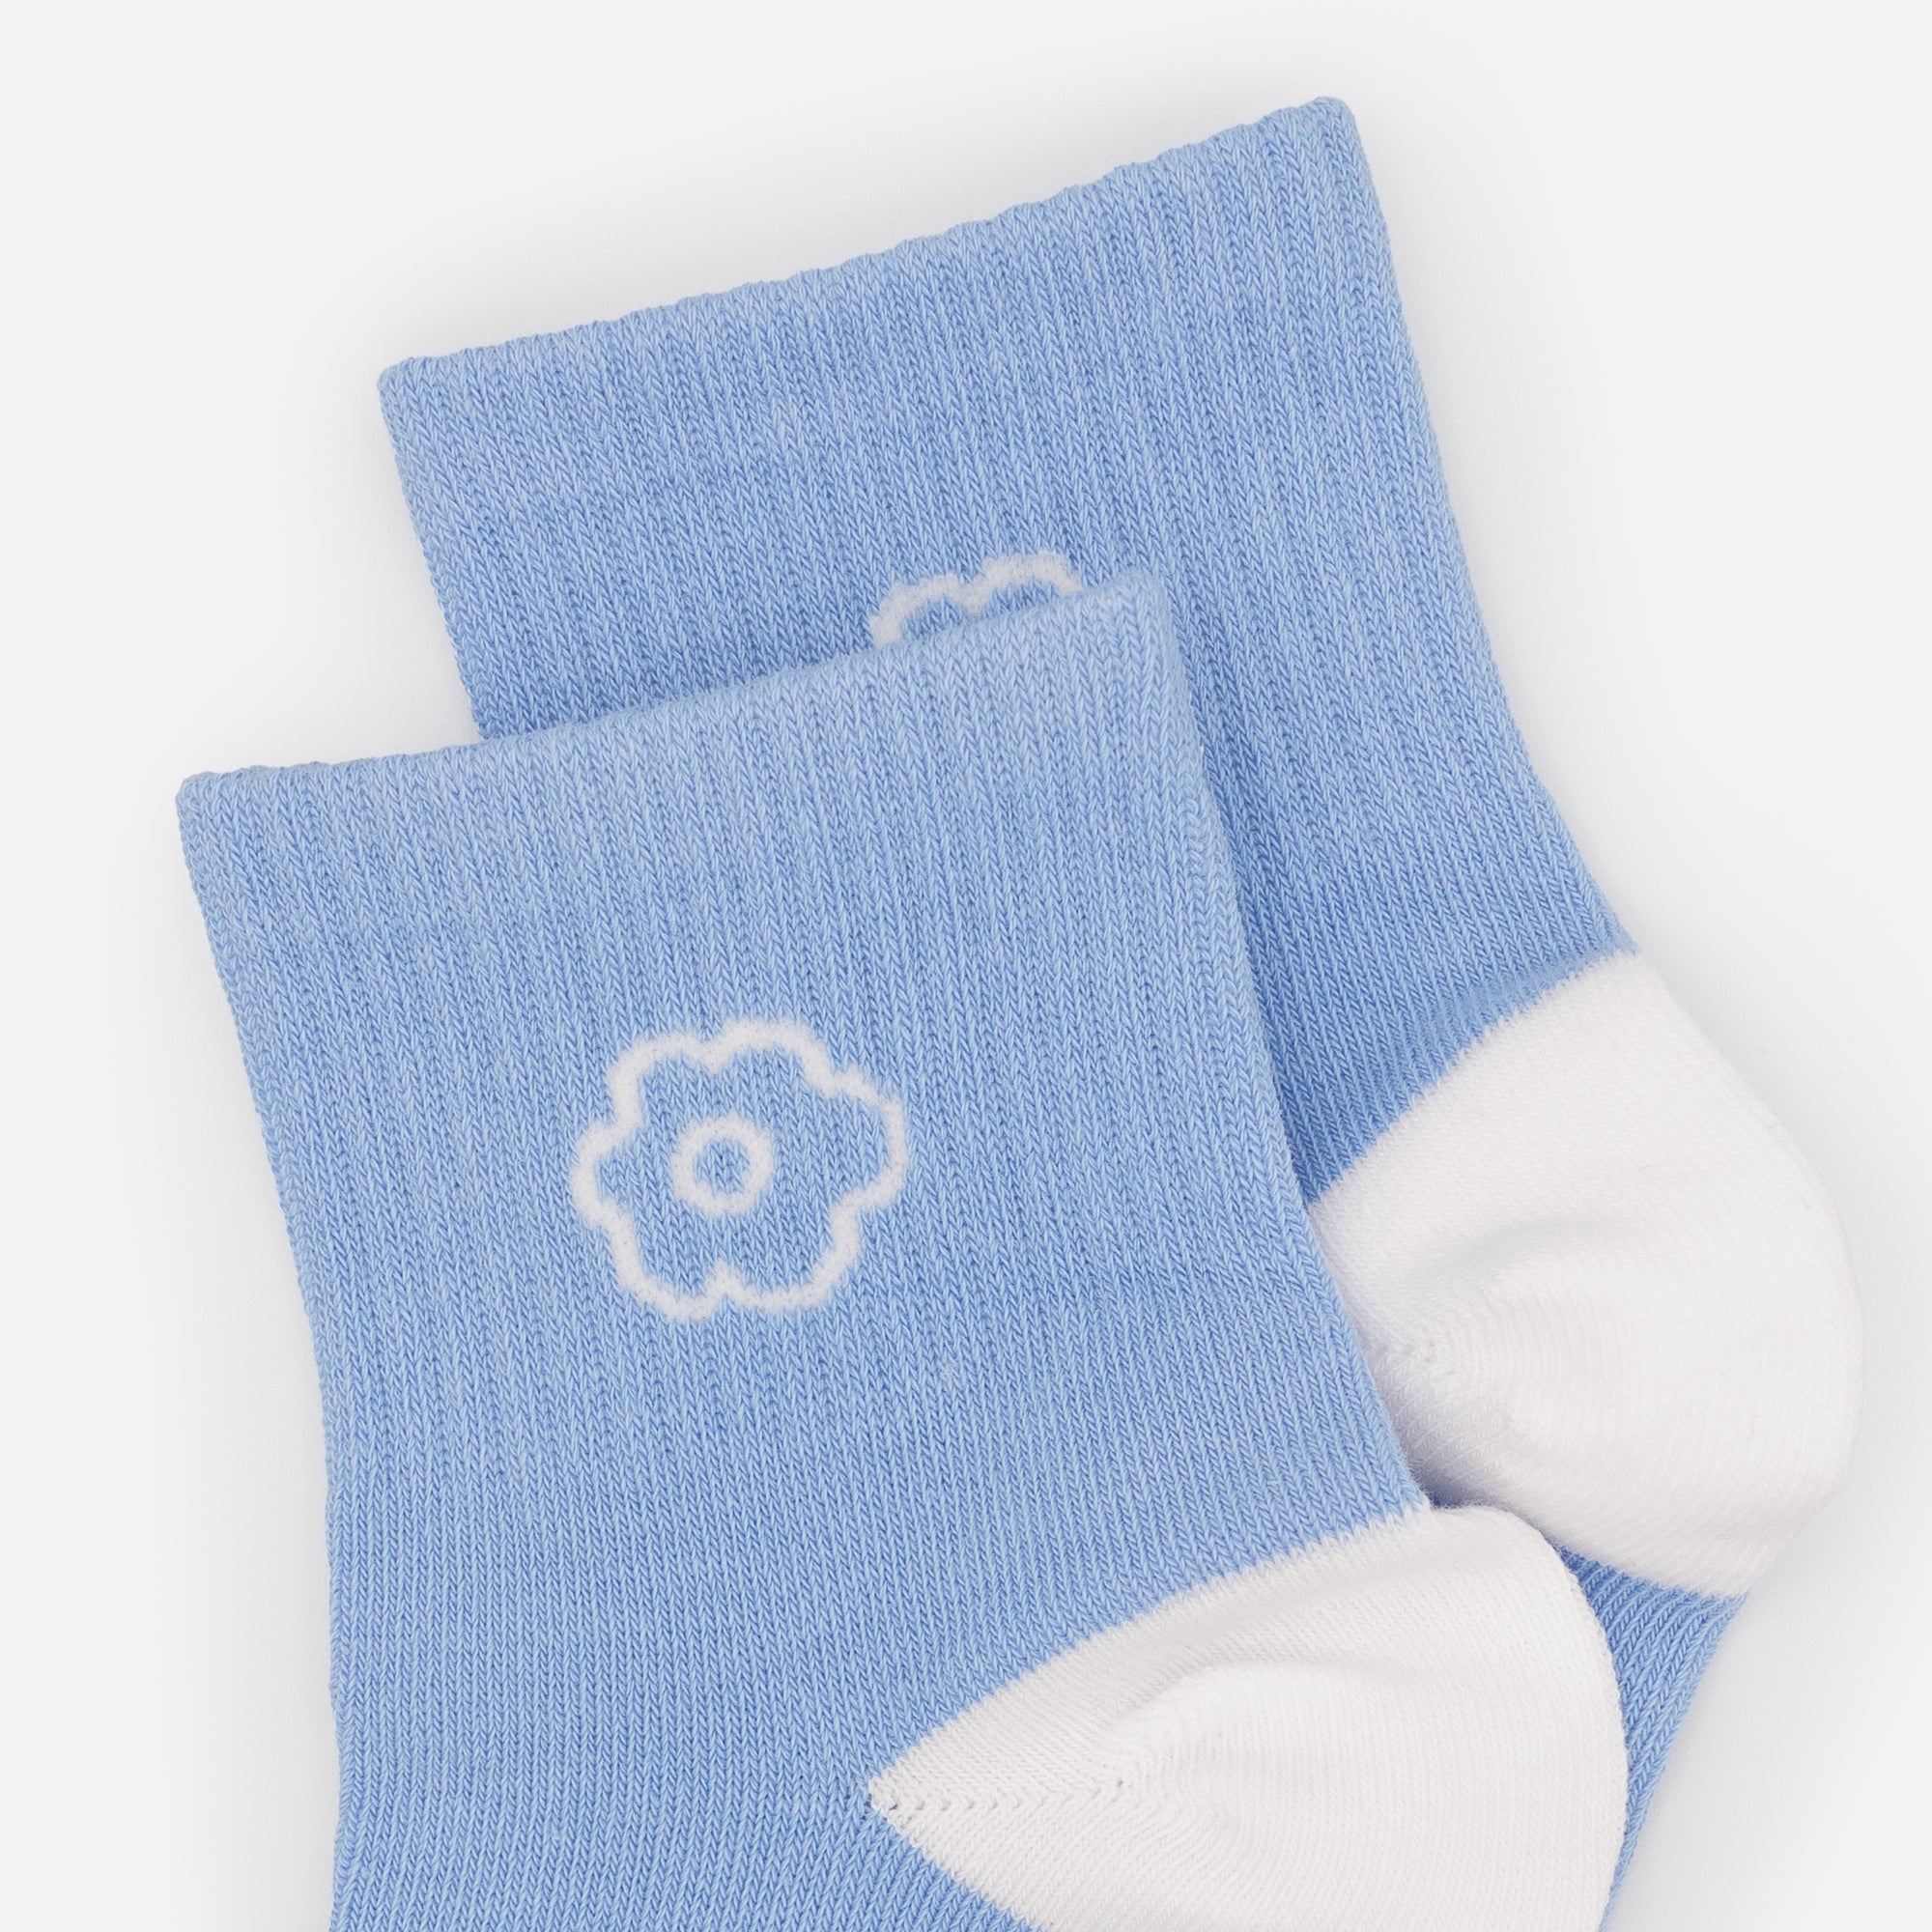 Mid-length pale blue stockings with white empty flowers